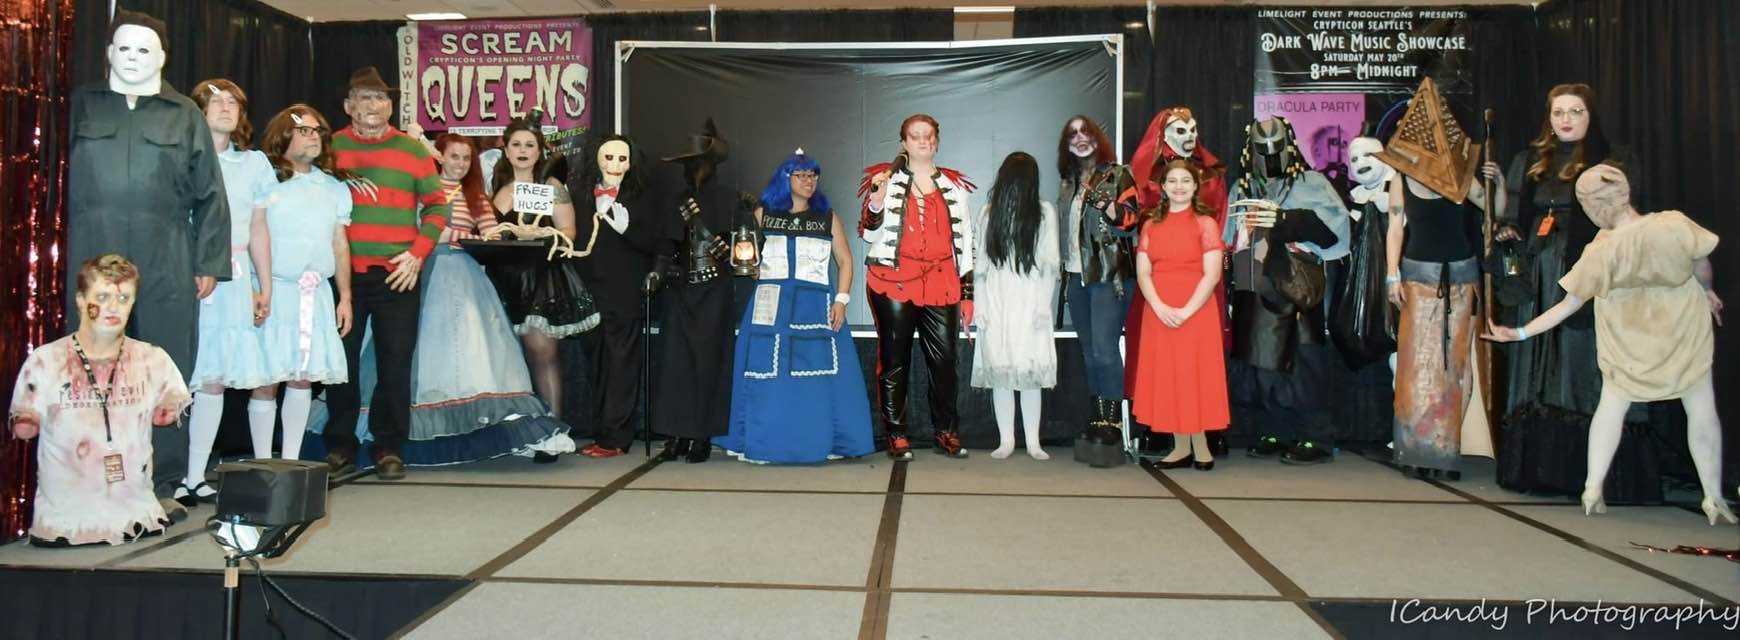 A group of people posing for a photo in costumes.